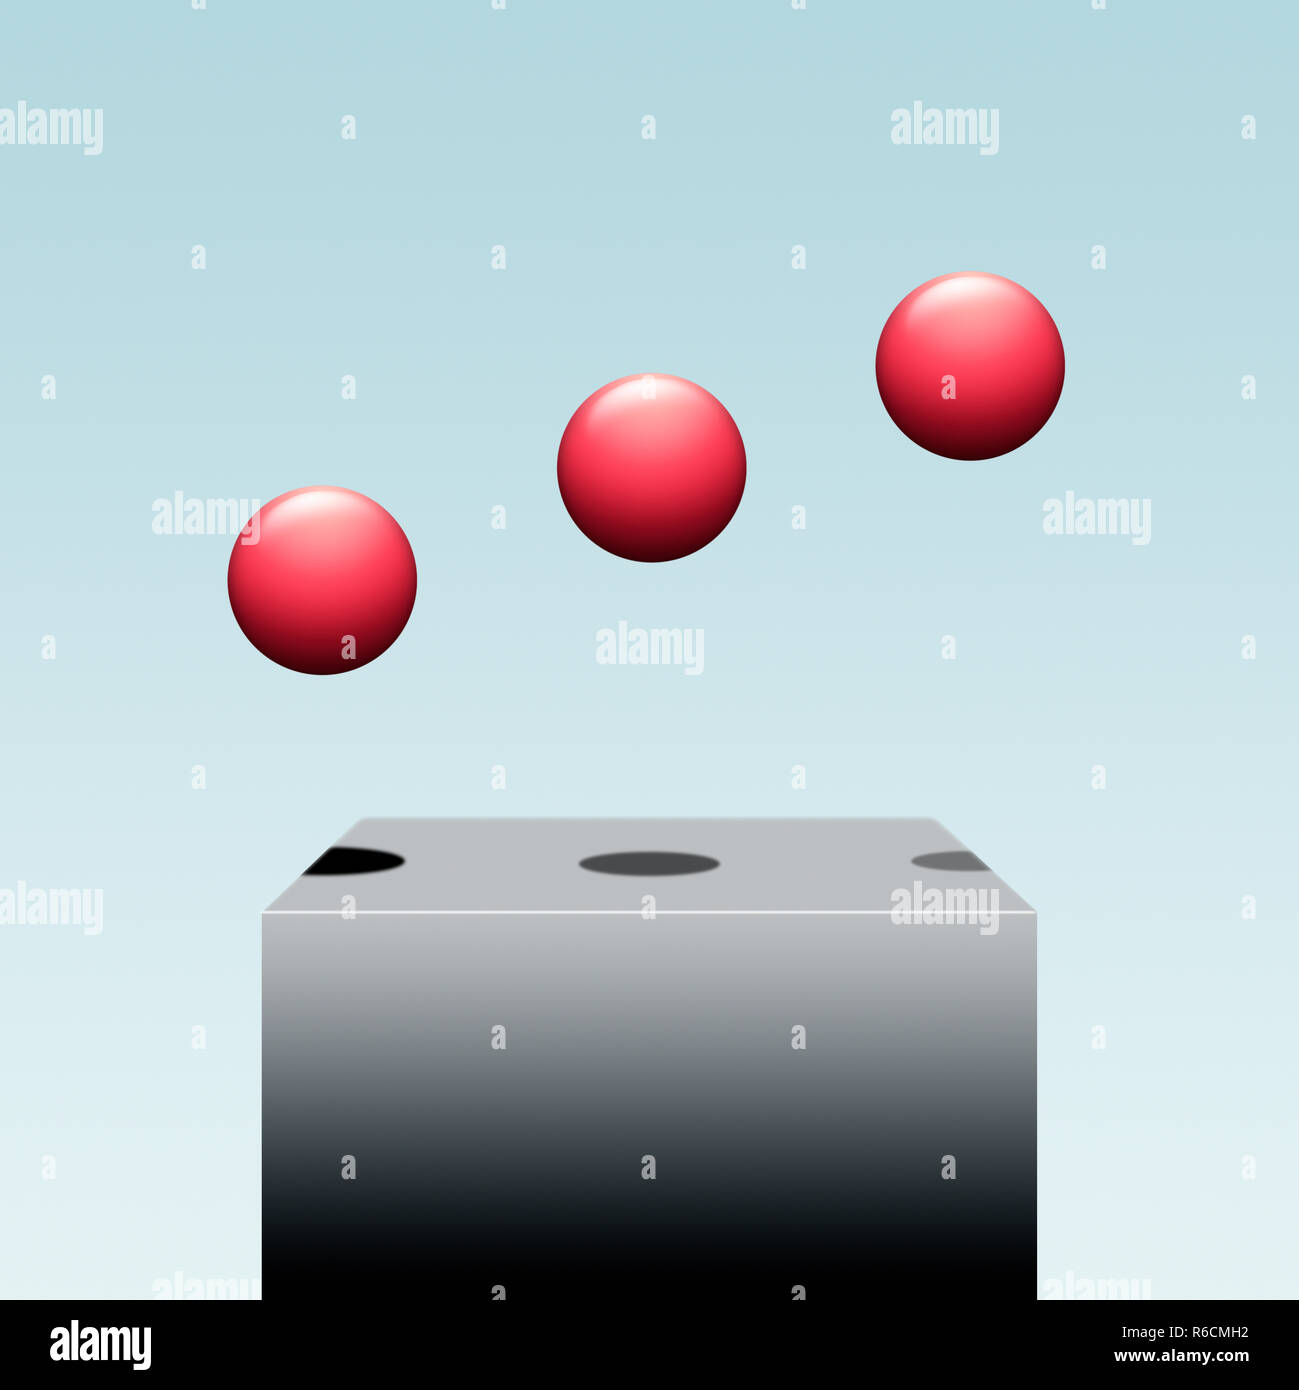 Three red balls above grey solid box, plain background Stock Photo